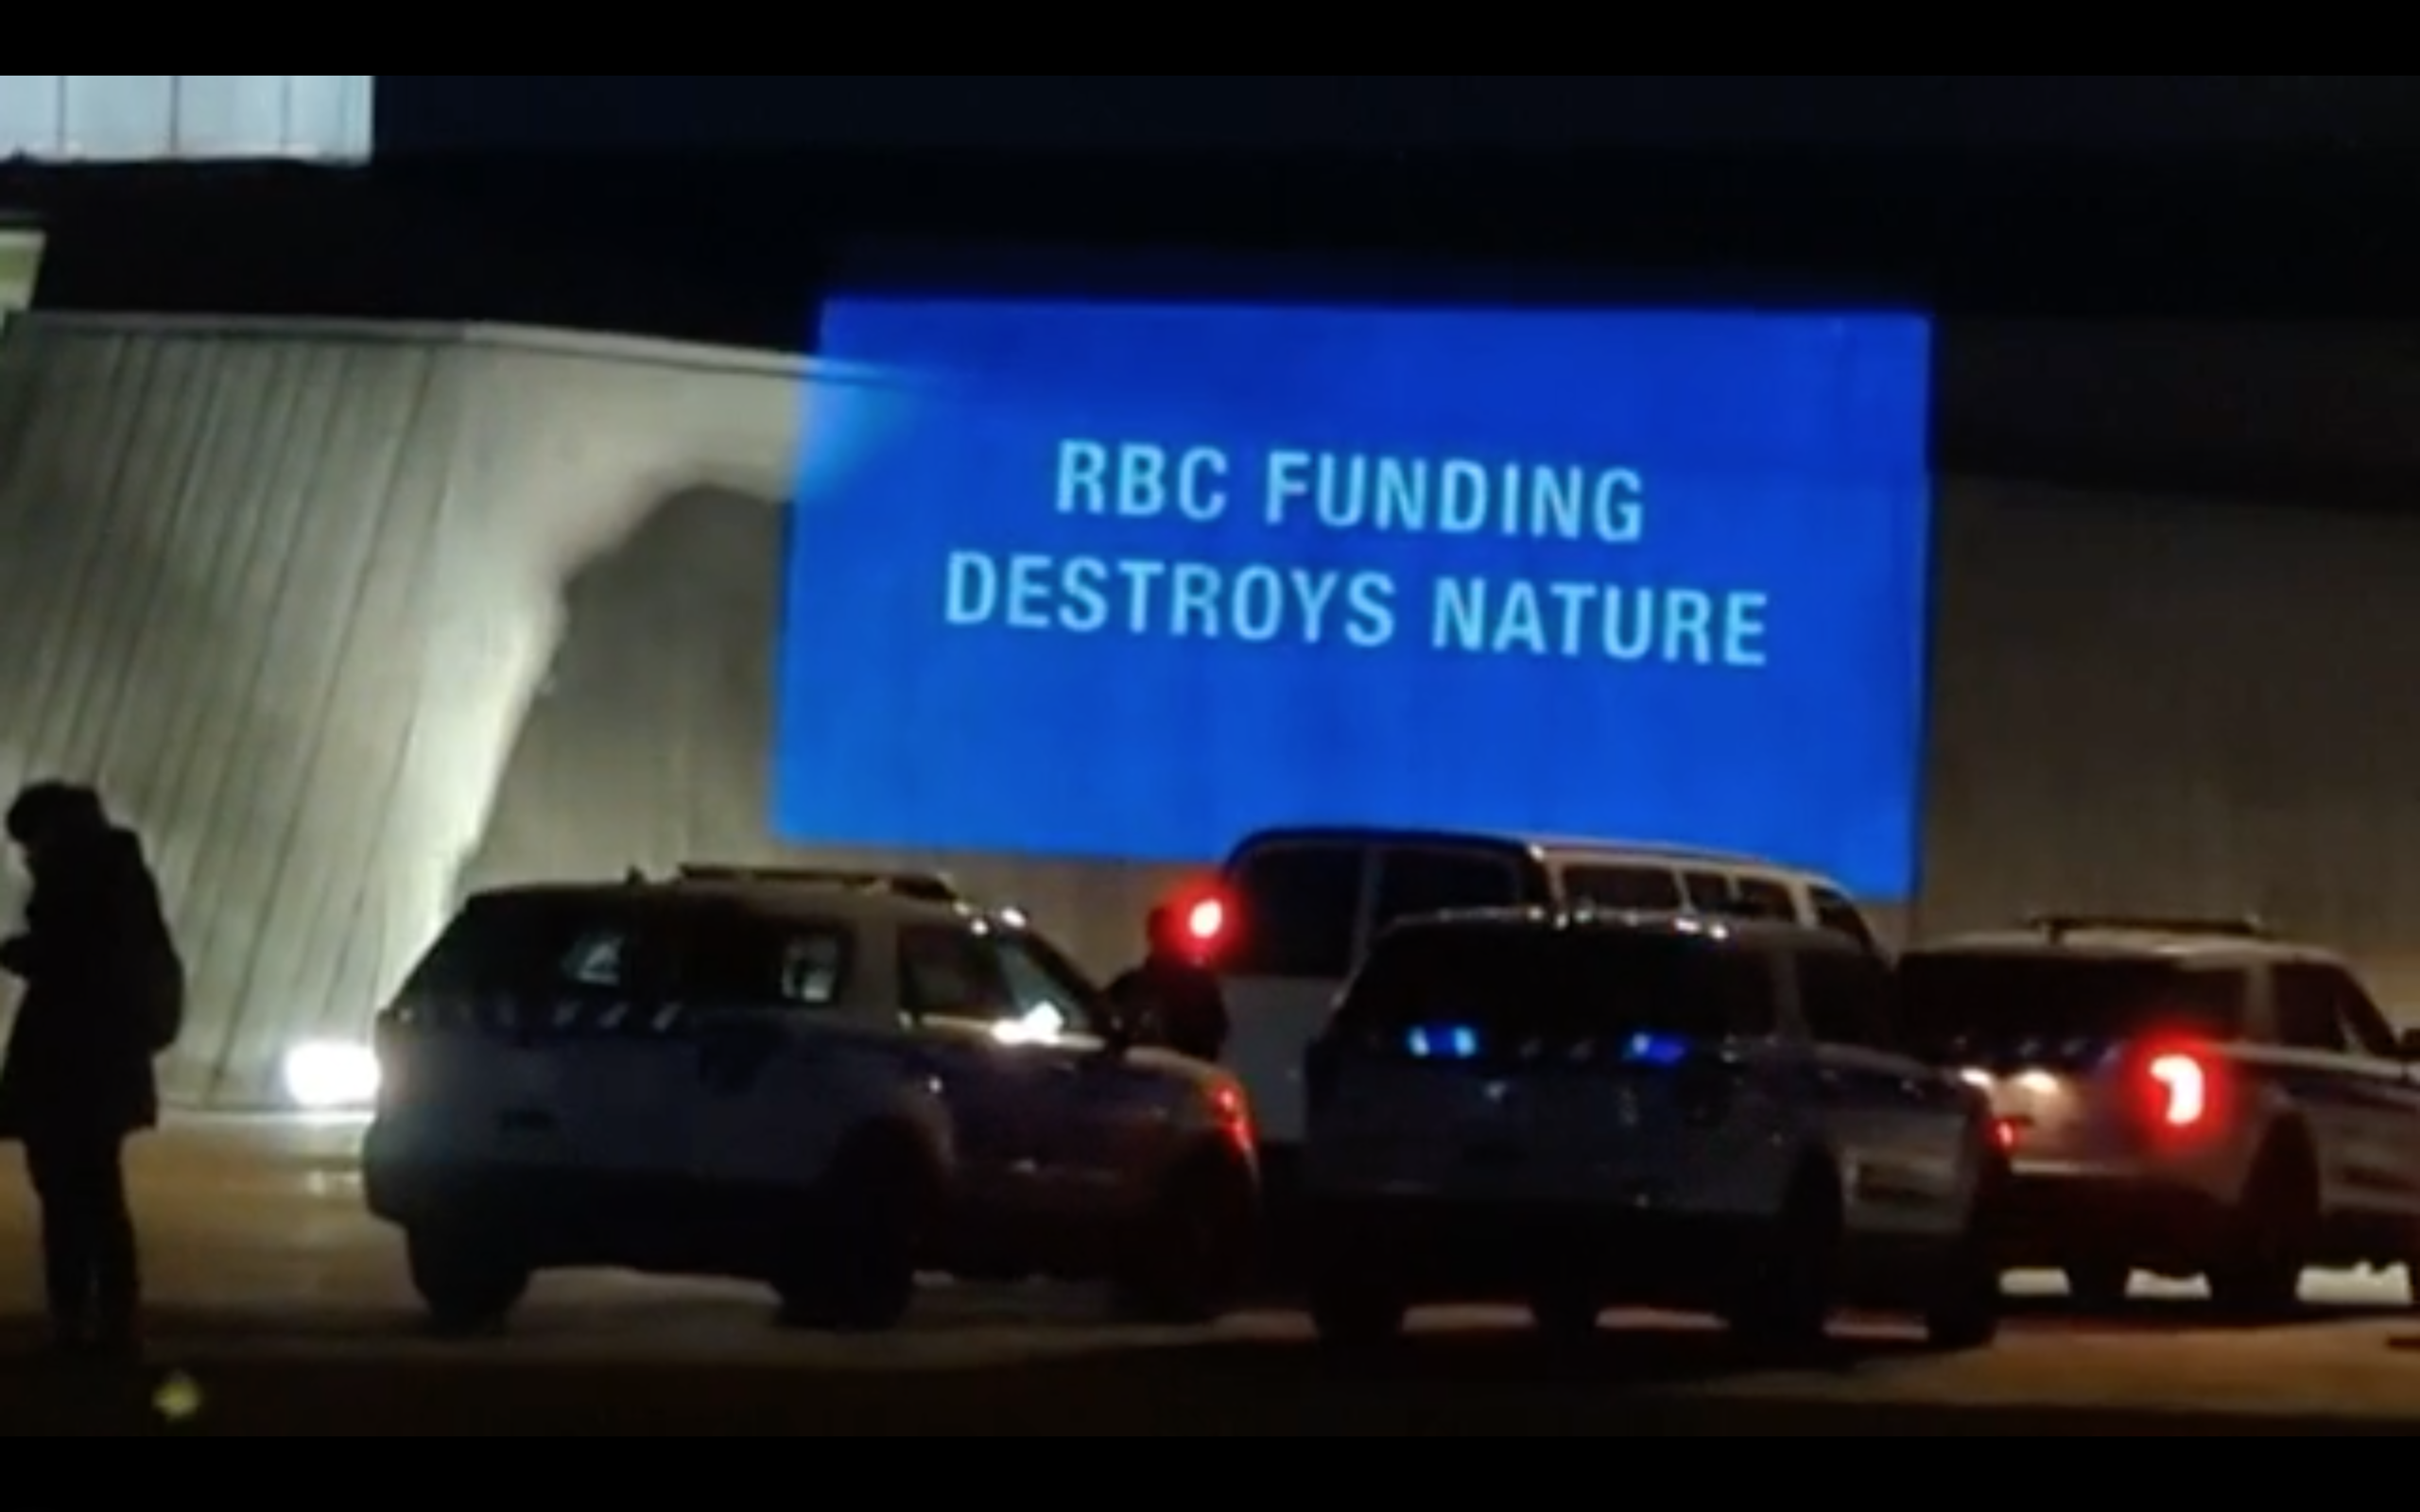 Night projection saying "RBC Funding Destroys Nature"